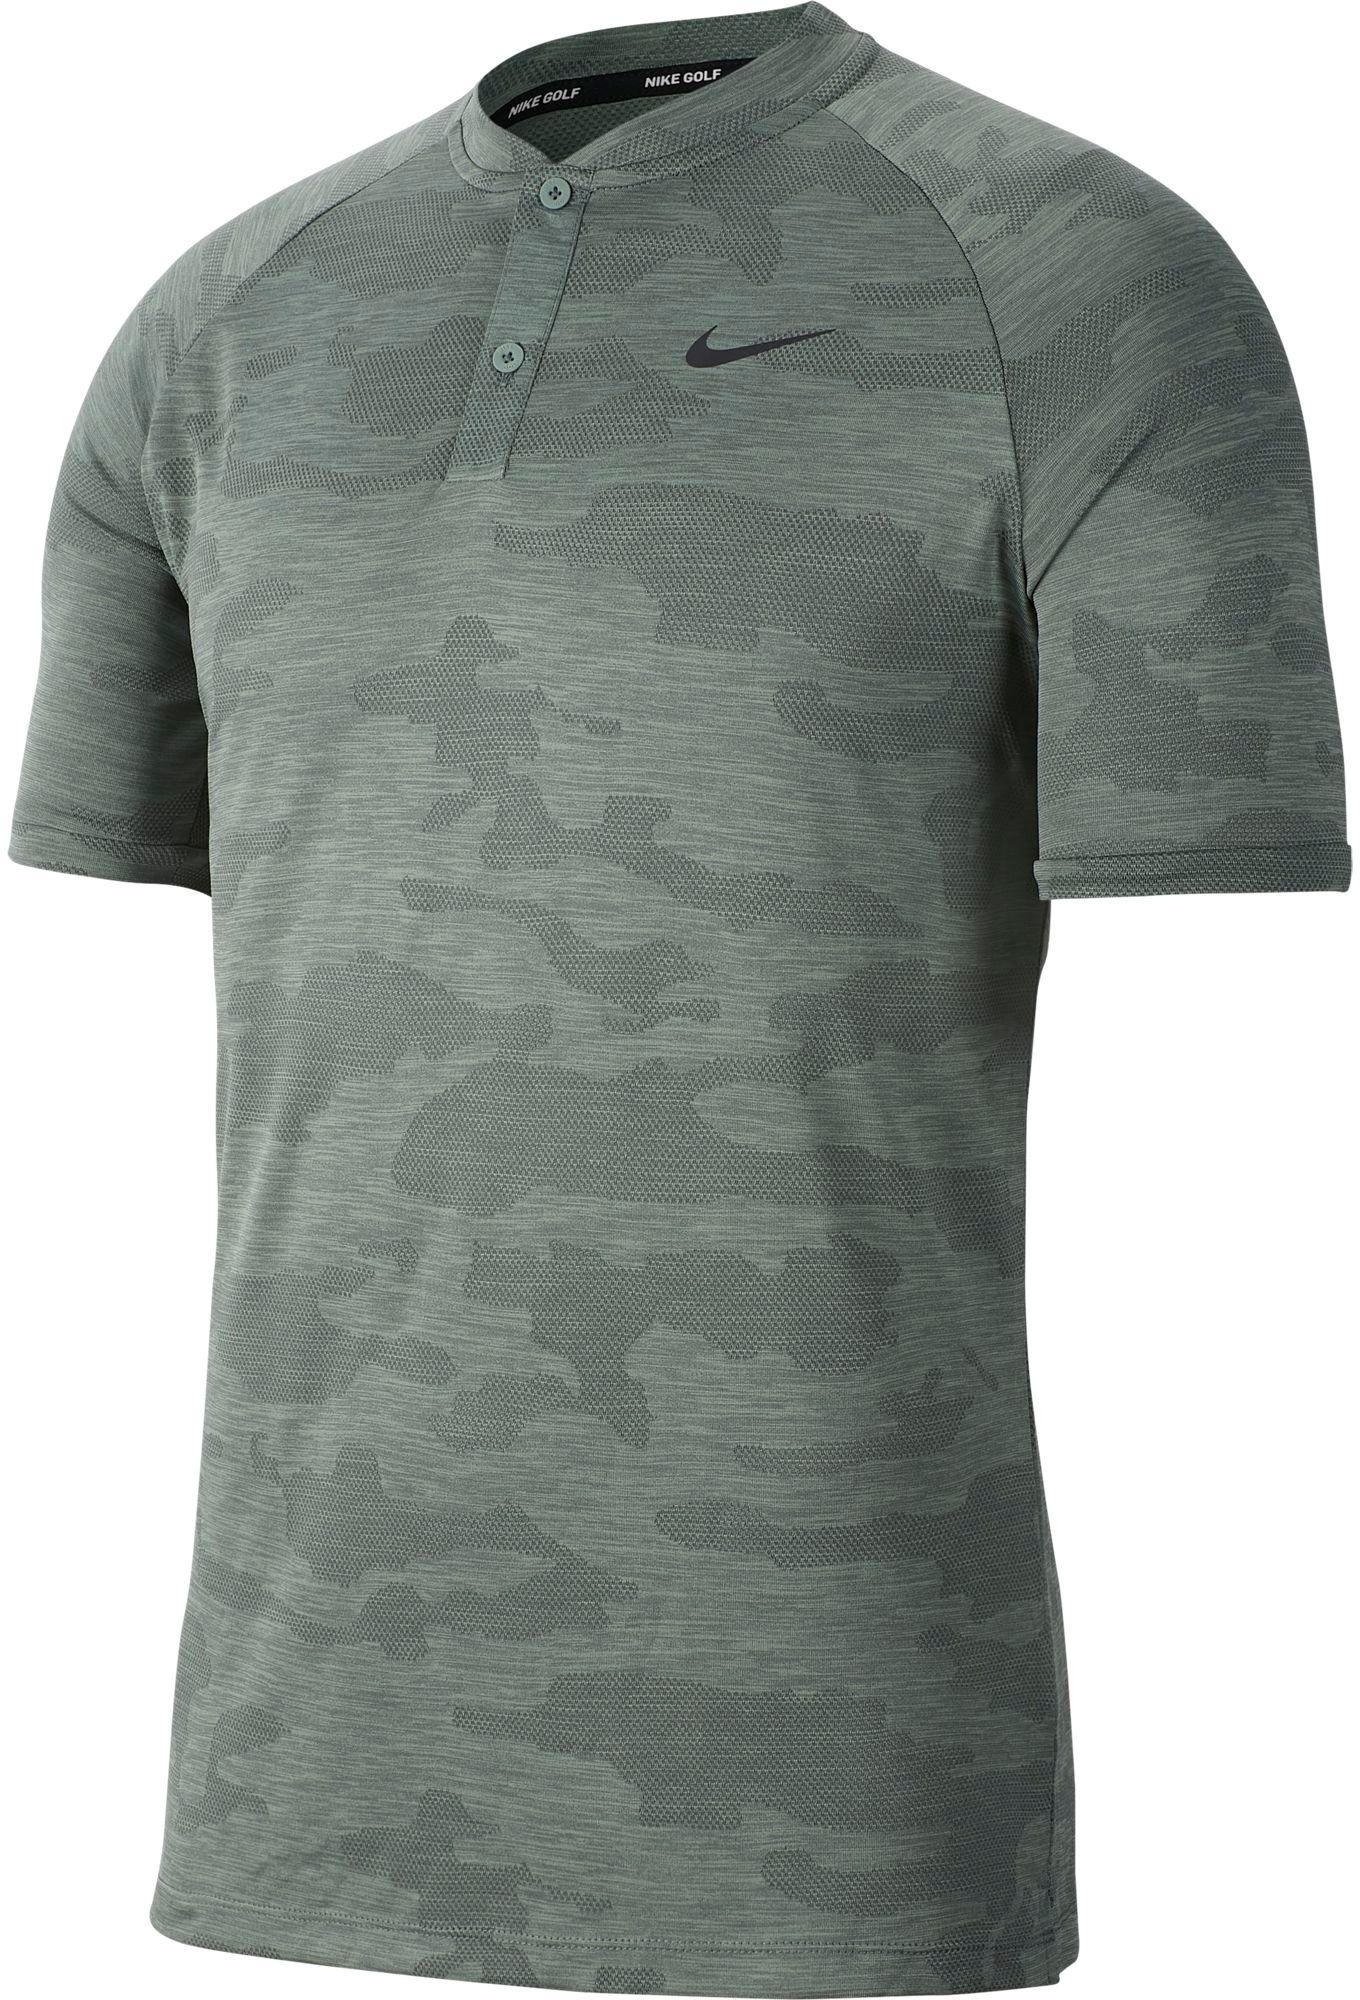 tiger woods zonal cooling camo